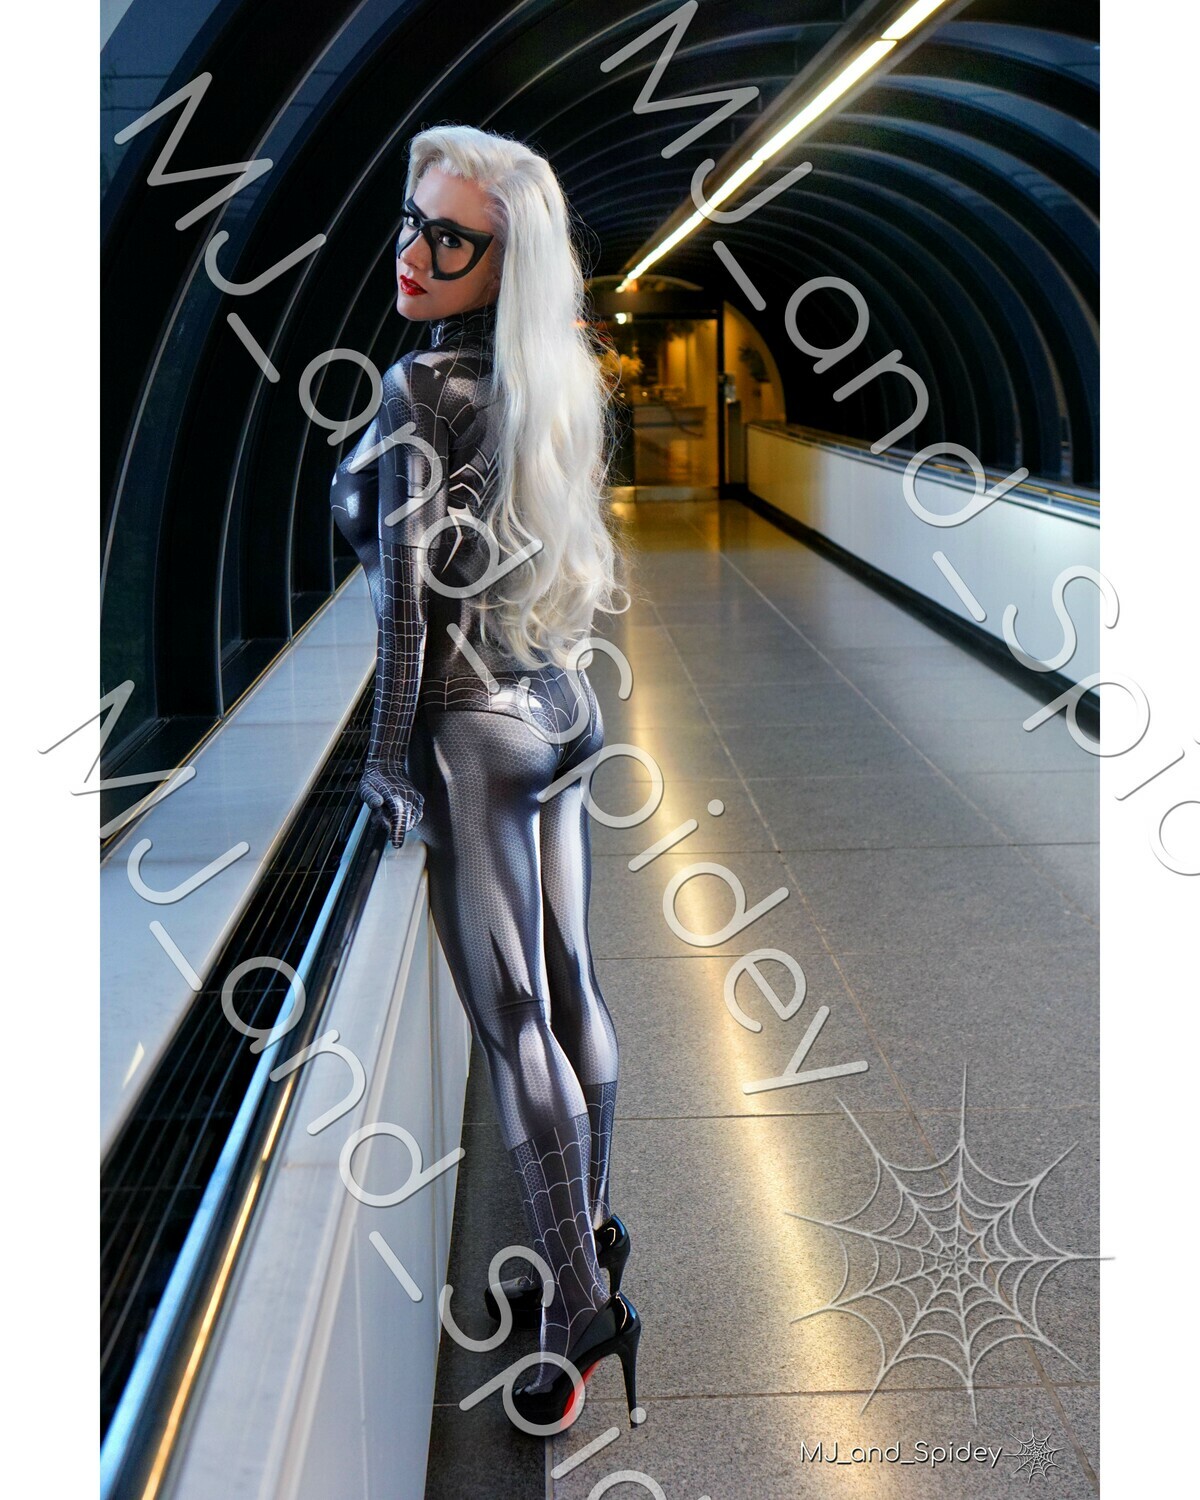 Marvel - Spider-Man - Black Cat - Symbiote 3 - Digital Cosplay Image (@MJ_and_Spidey, MJ and Spidey, Comics)